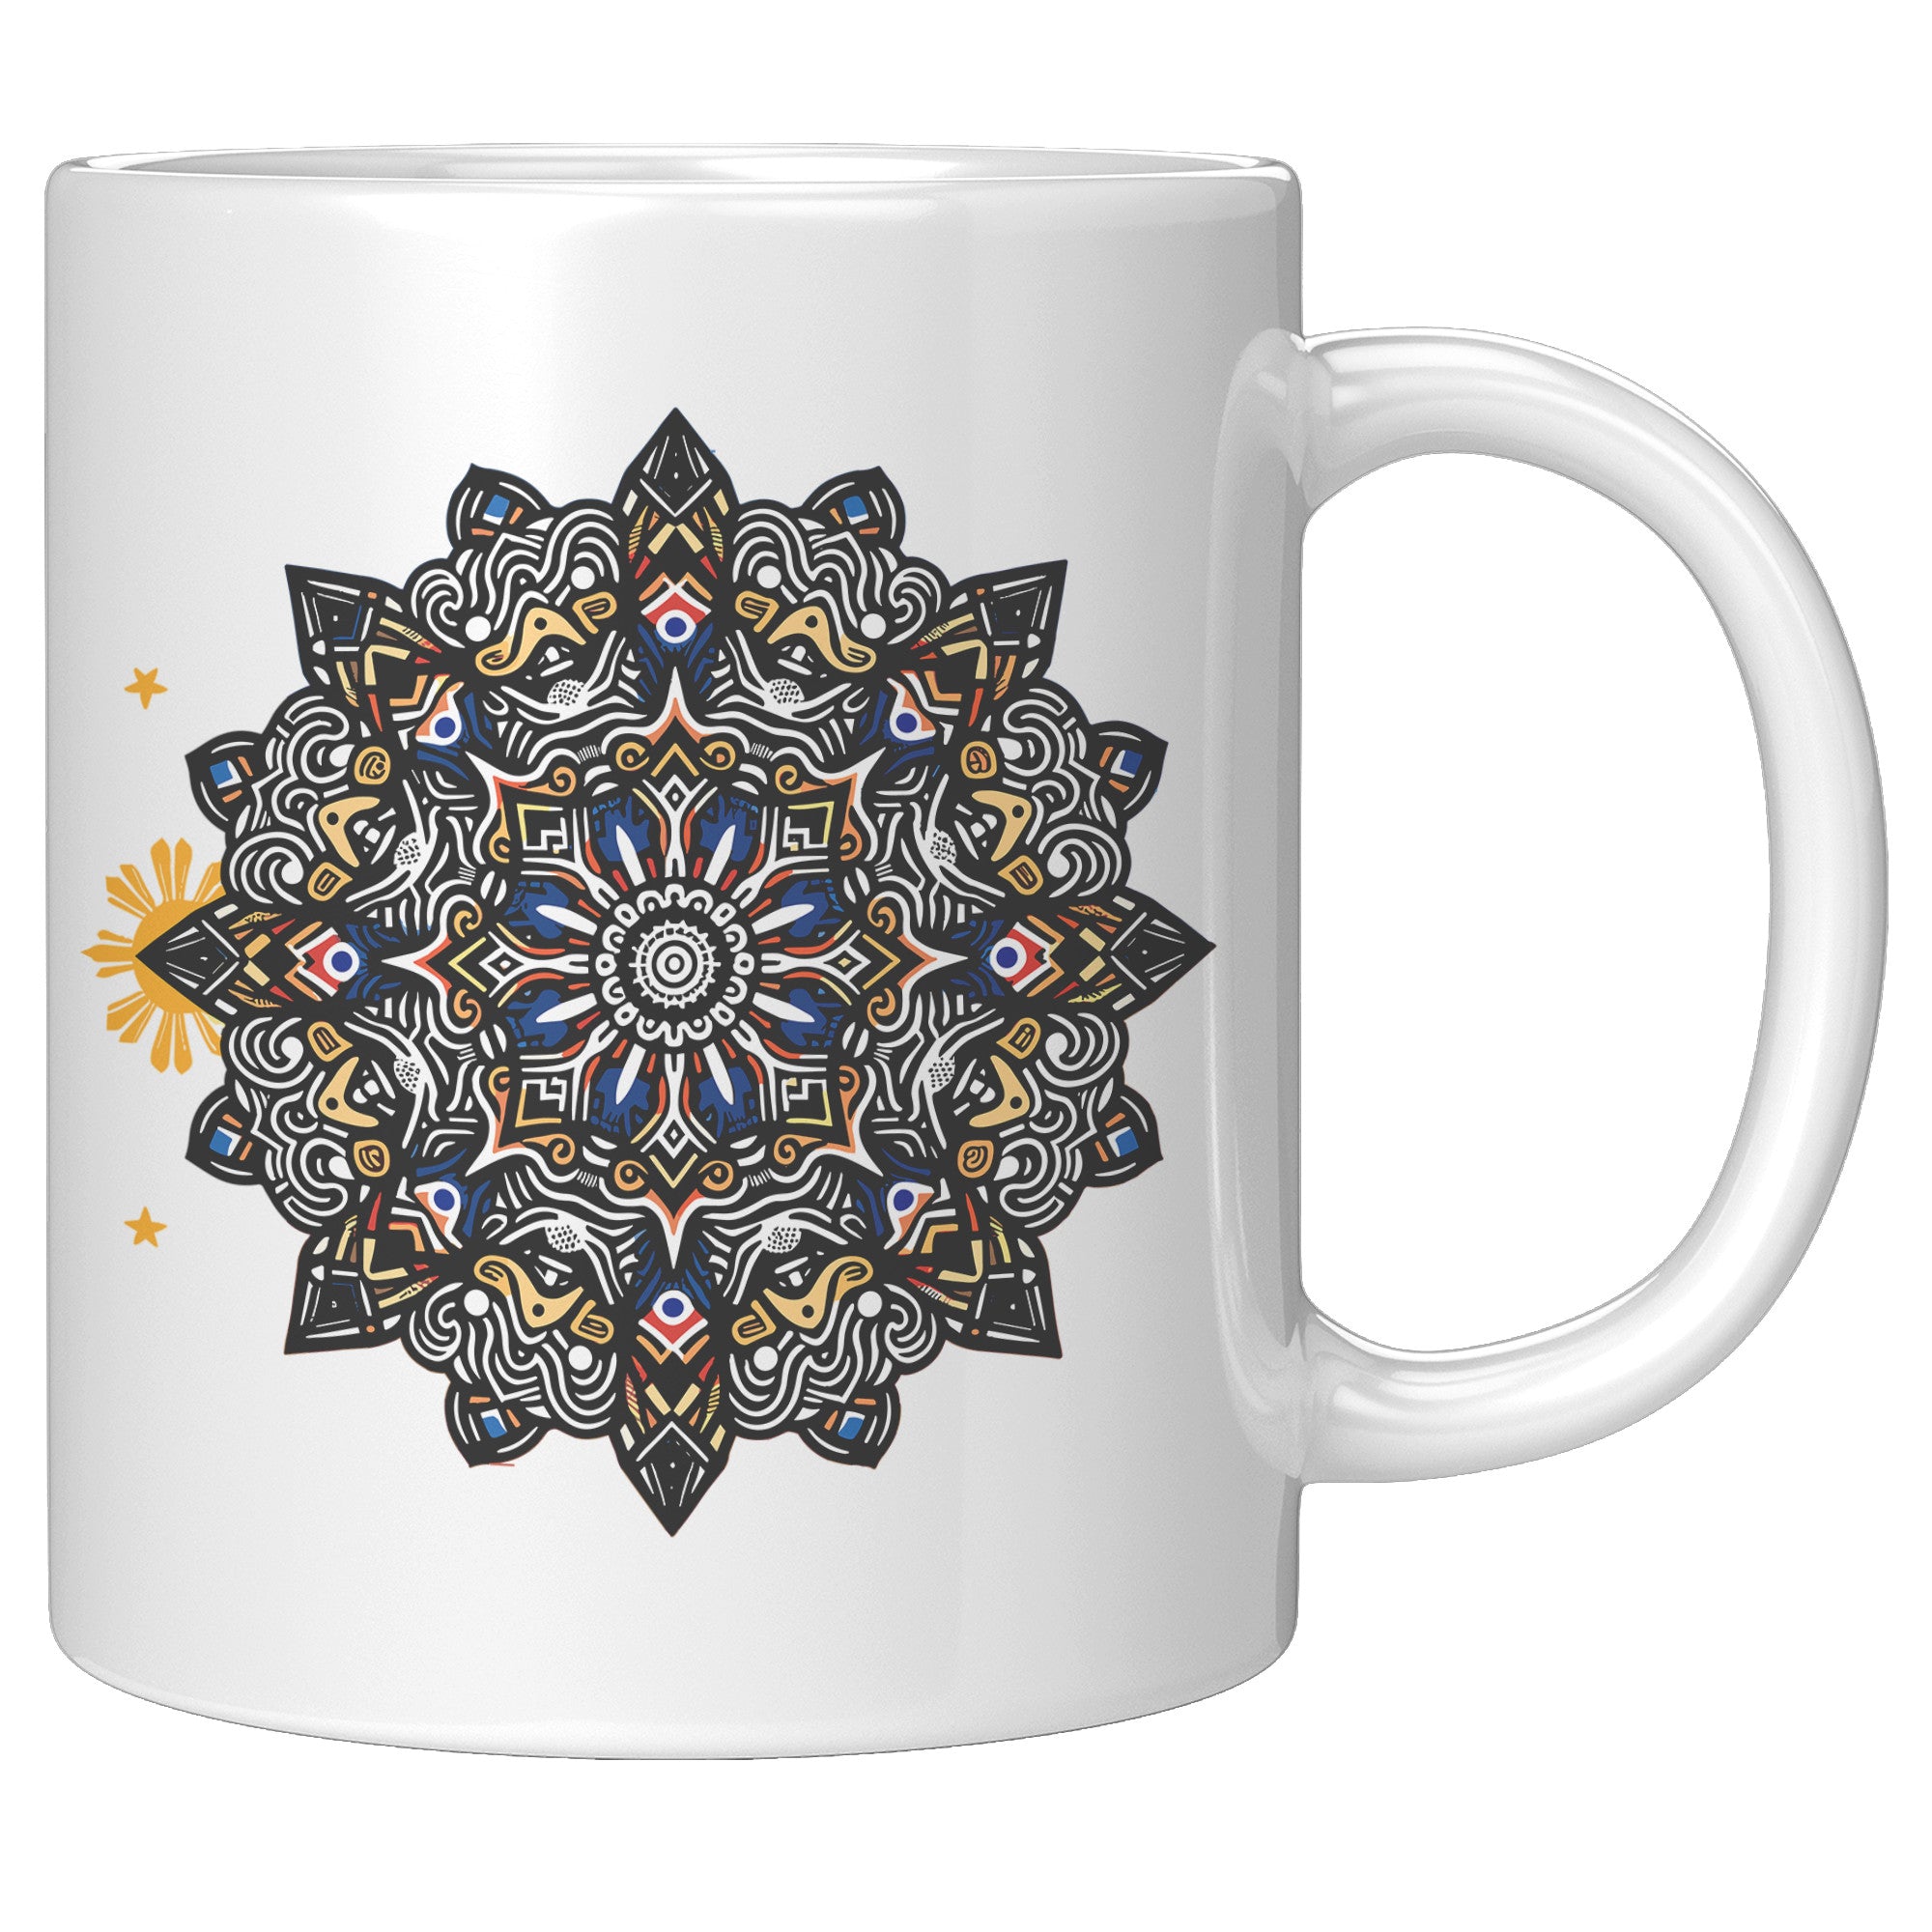 Proudly Pinoy Coffee Mug - Vibrant Filipino Flag Design - Patriotic Gift for Filipinos - Celebrate Heritage with Every Sip!" - J